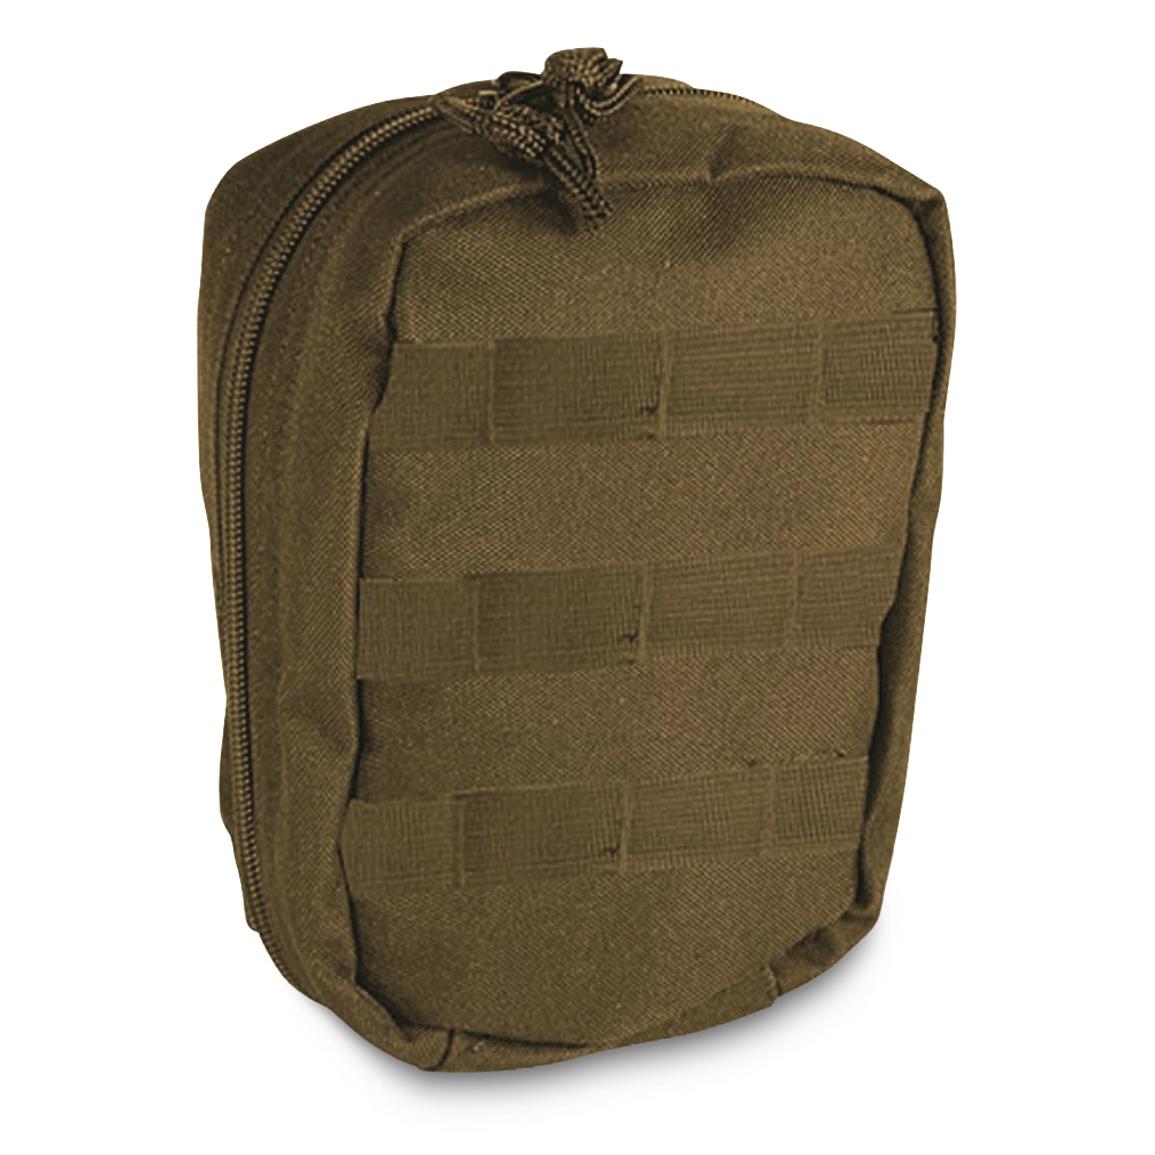 Voodoo Tactical Trauma Pouch with Kit, 36 Piece, Coyote